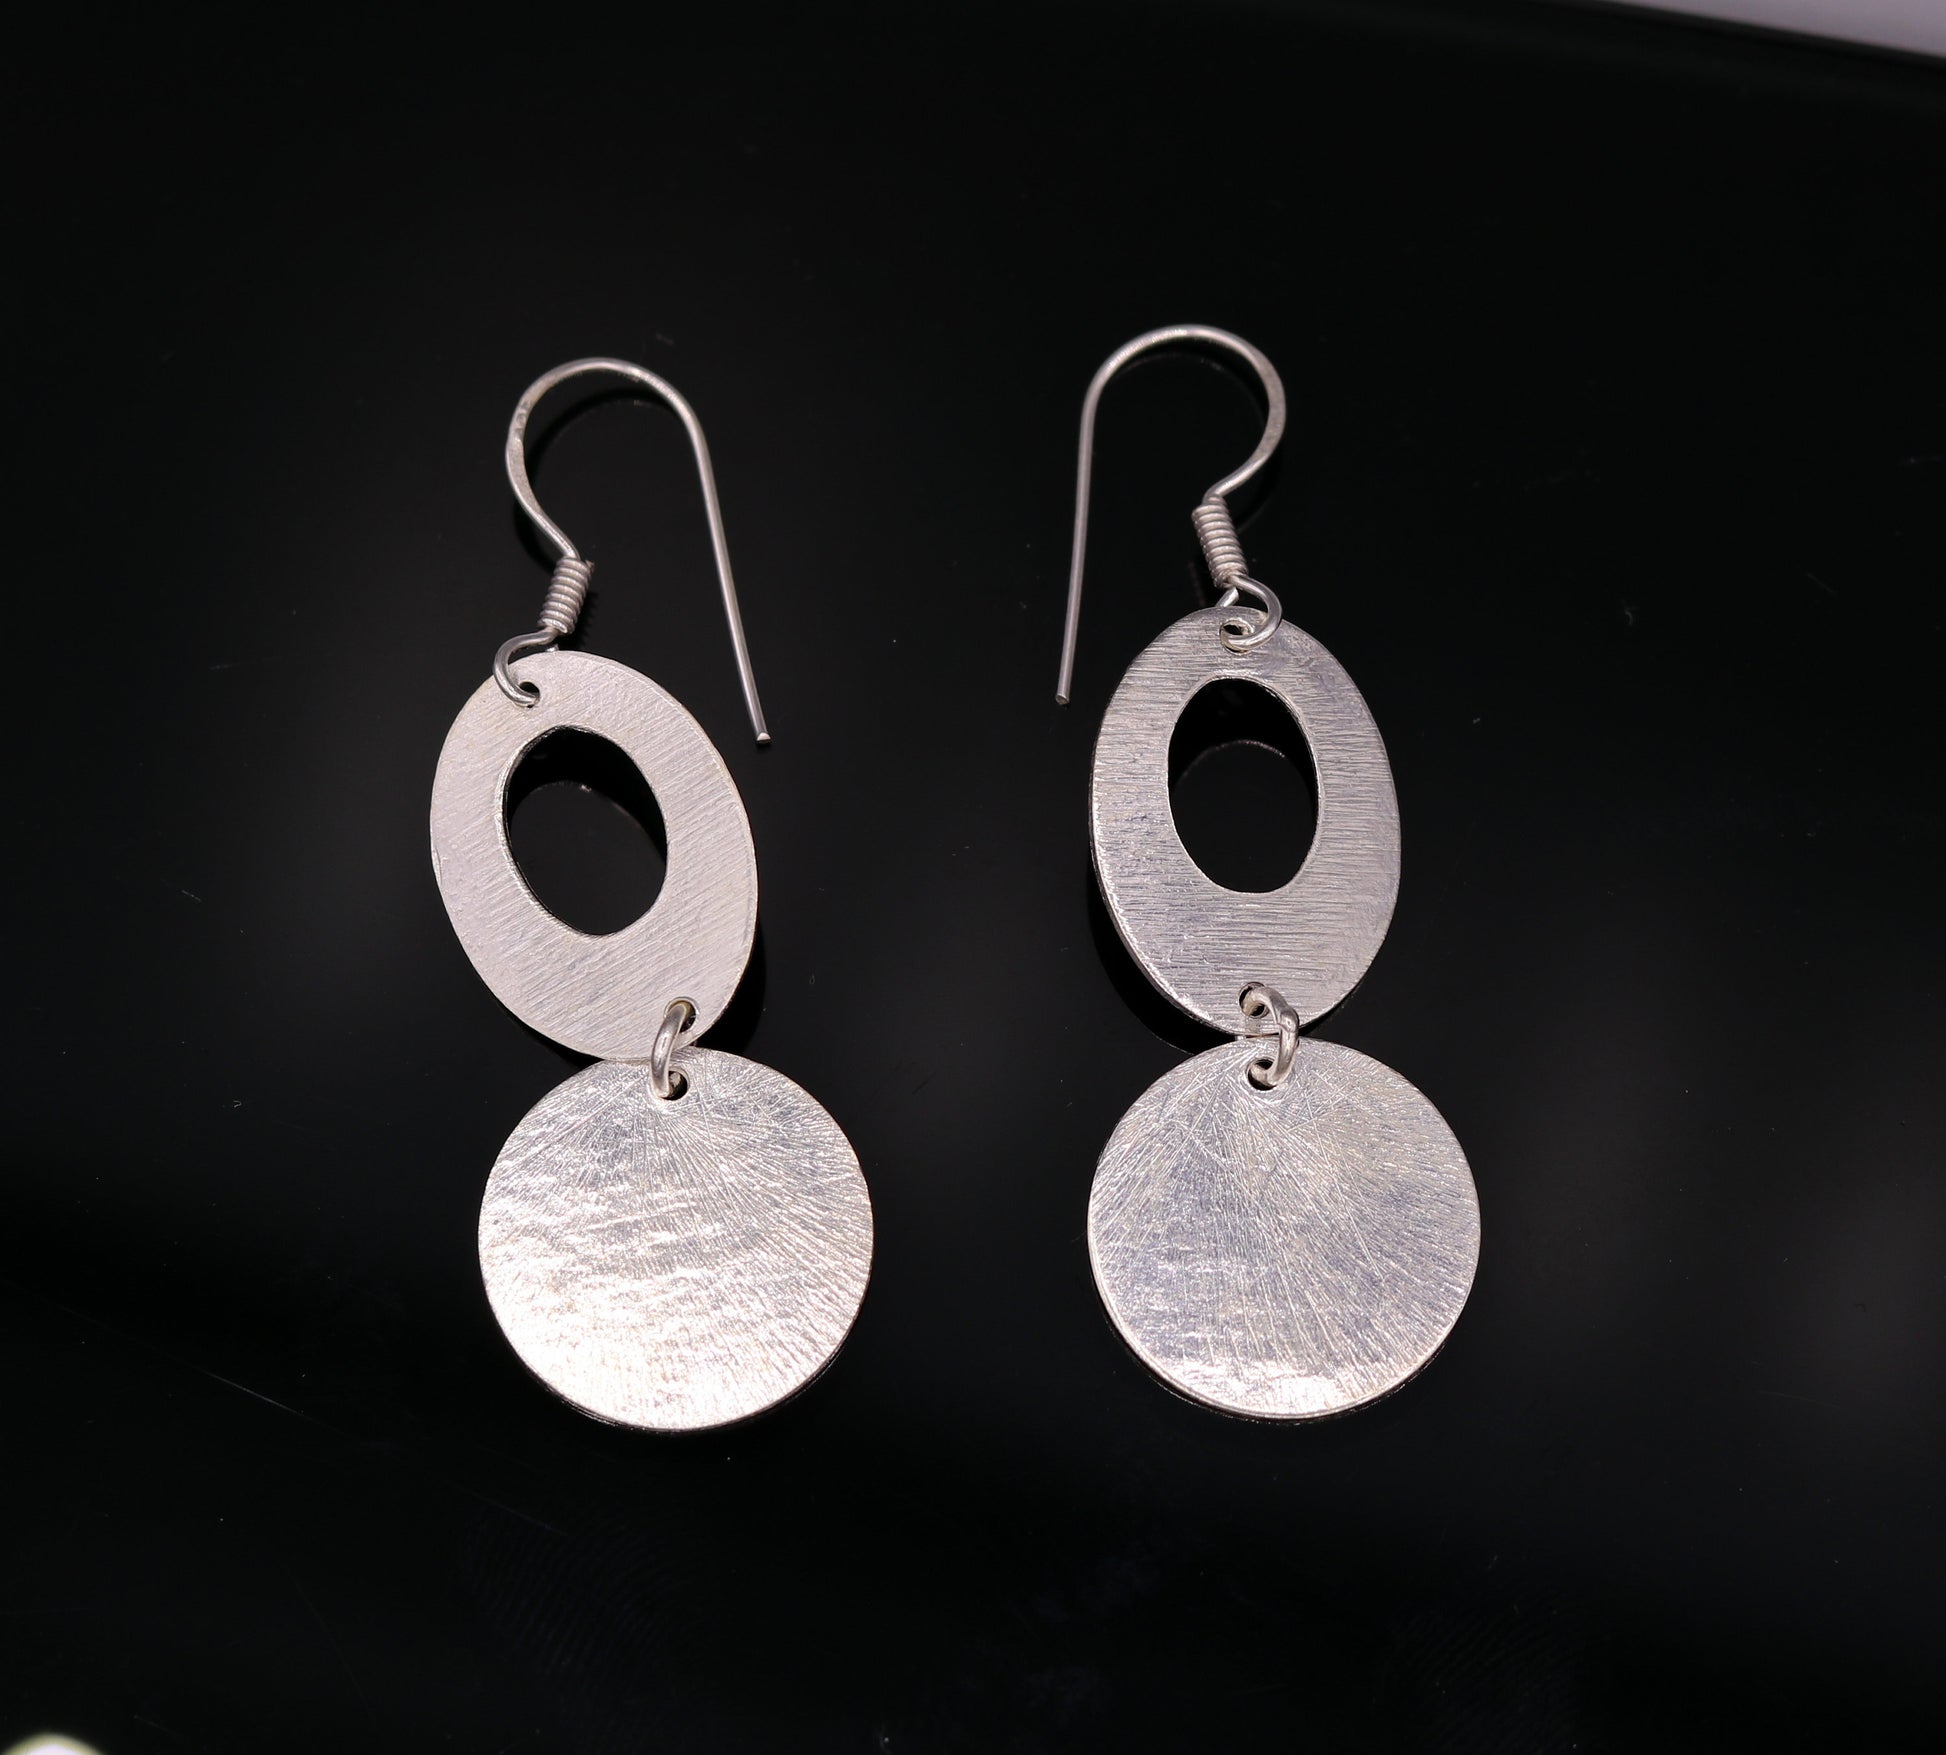 Handmade  925 solid sterling silver scratch link fancy hoops earrings tribal jewelry from Rajasthan india daily use jewelry s418 - TRIBAL ORNAMENTS